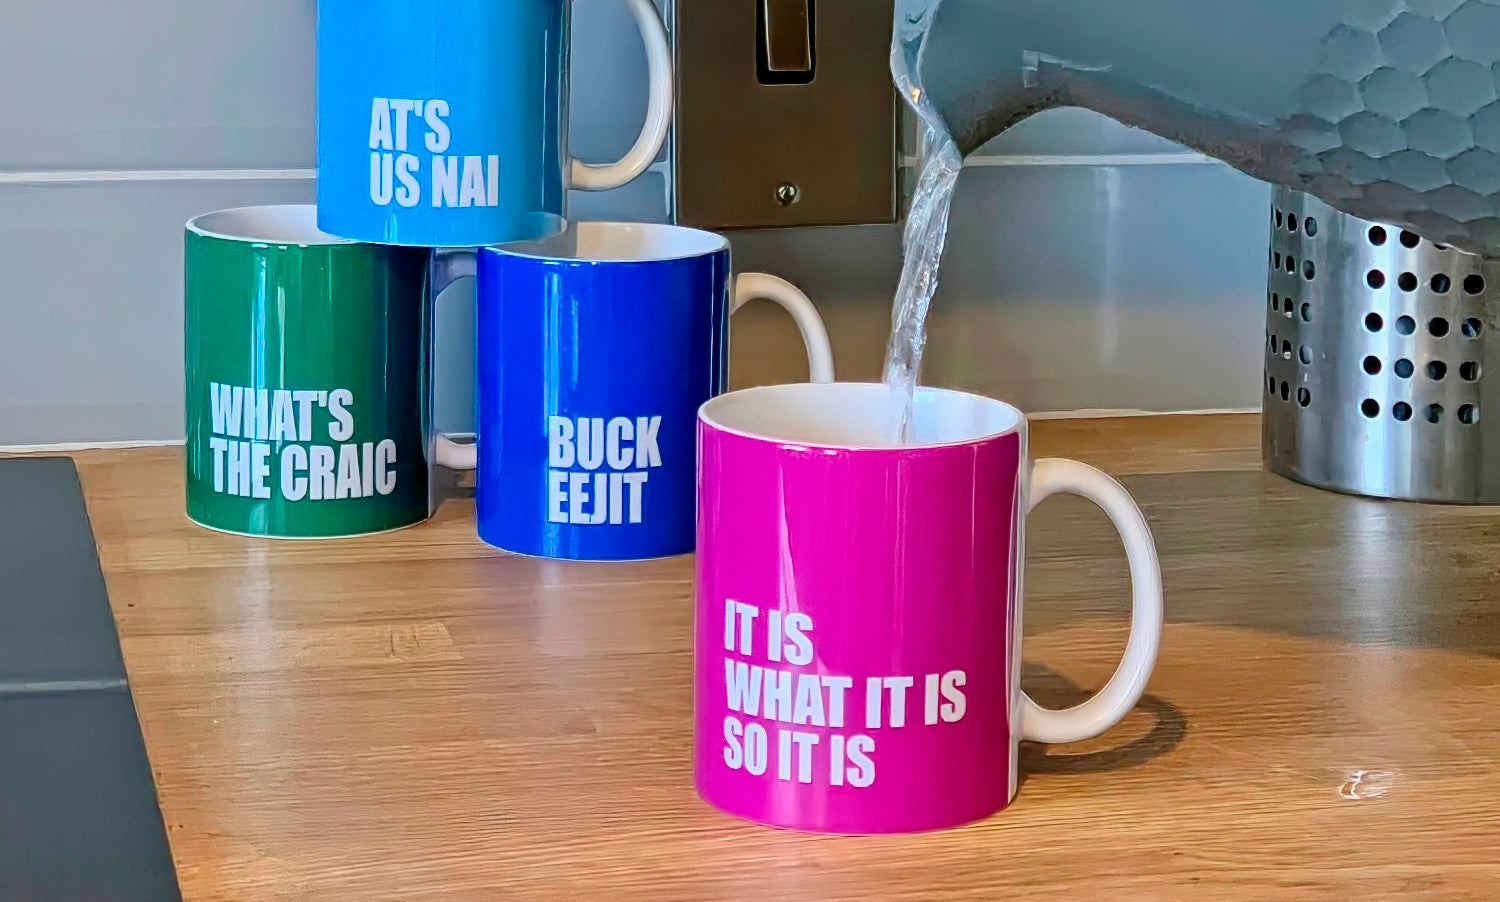 Photograph of the Northern Irish Slang Mugs in a kitchen with water being poured into the It Is What It Is Mug.